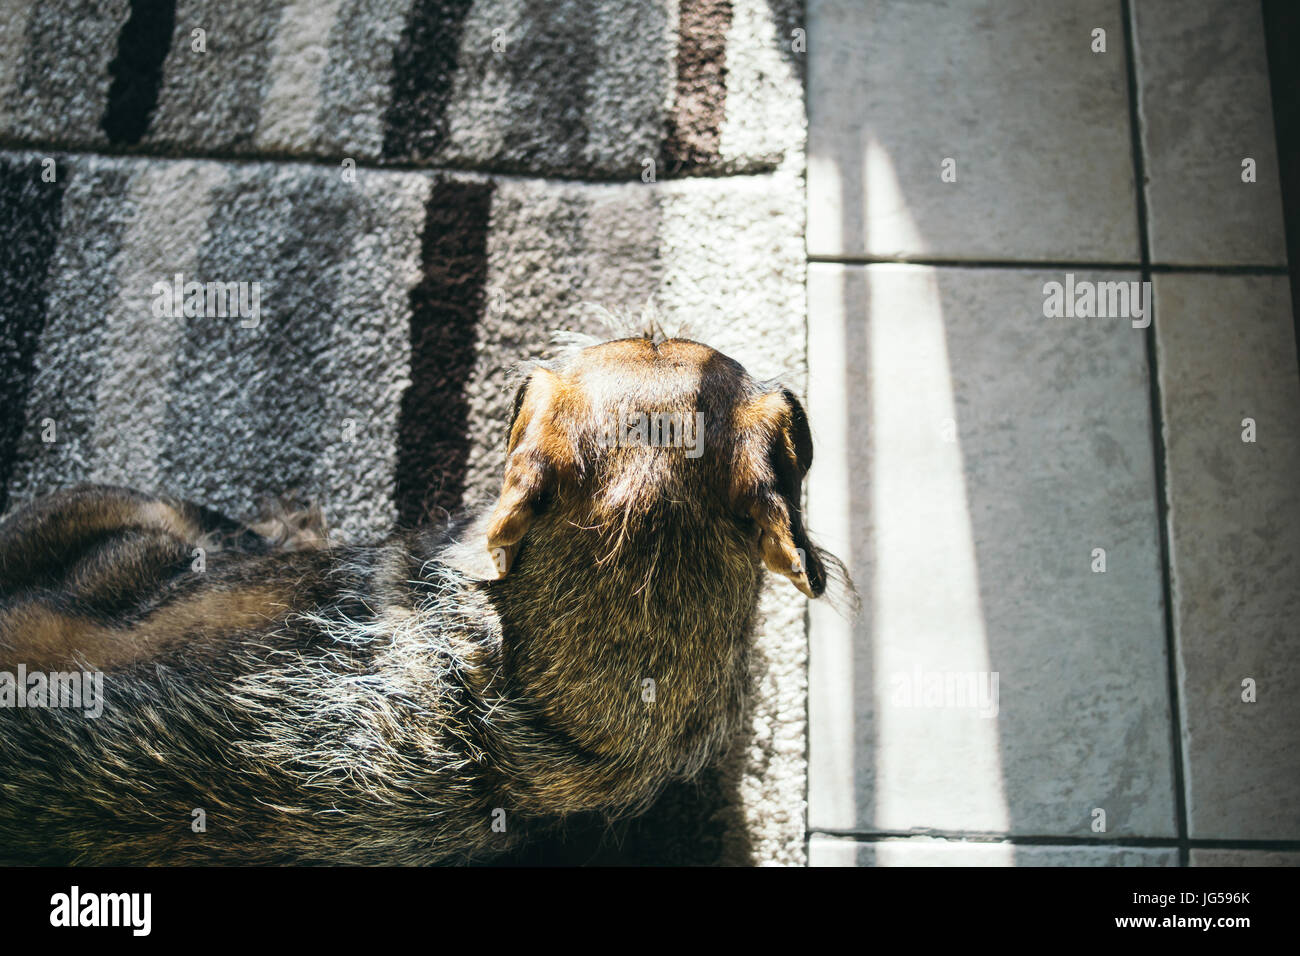 Dachshund seen from above lying on the ground indoors. Stock Photo